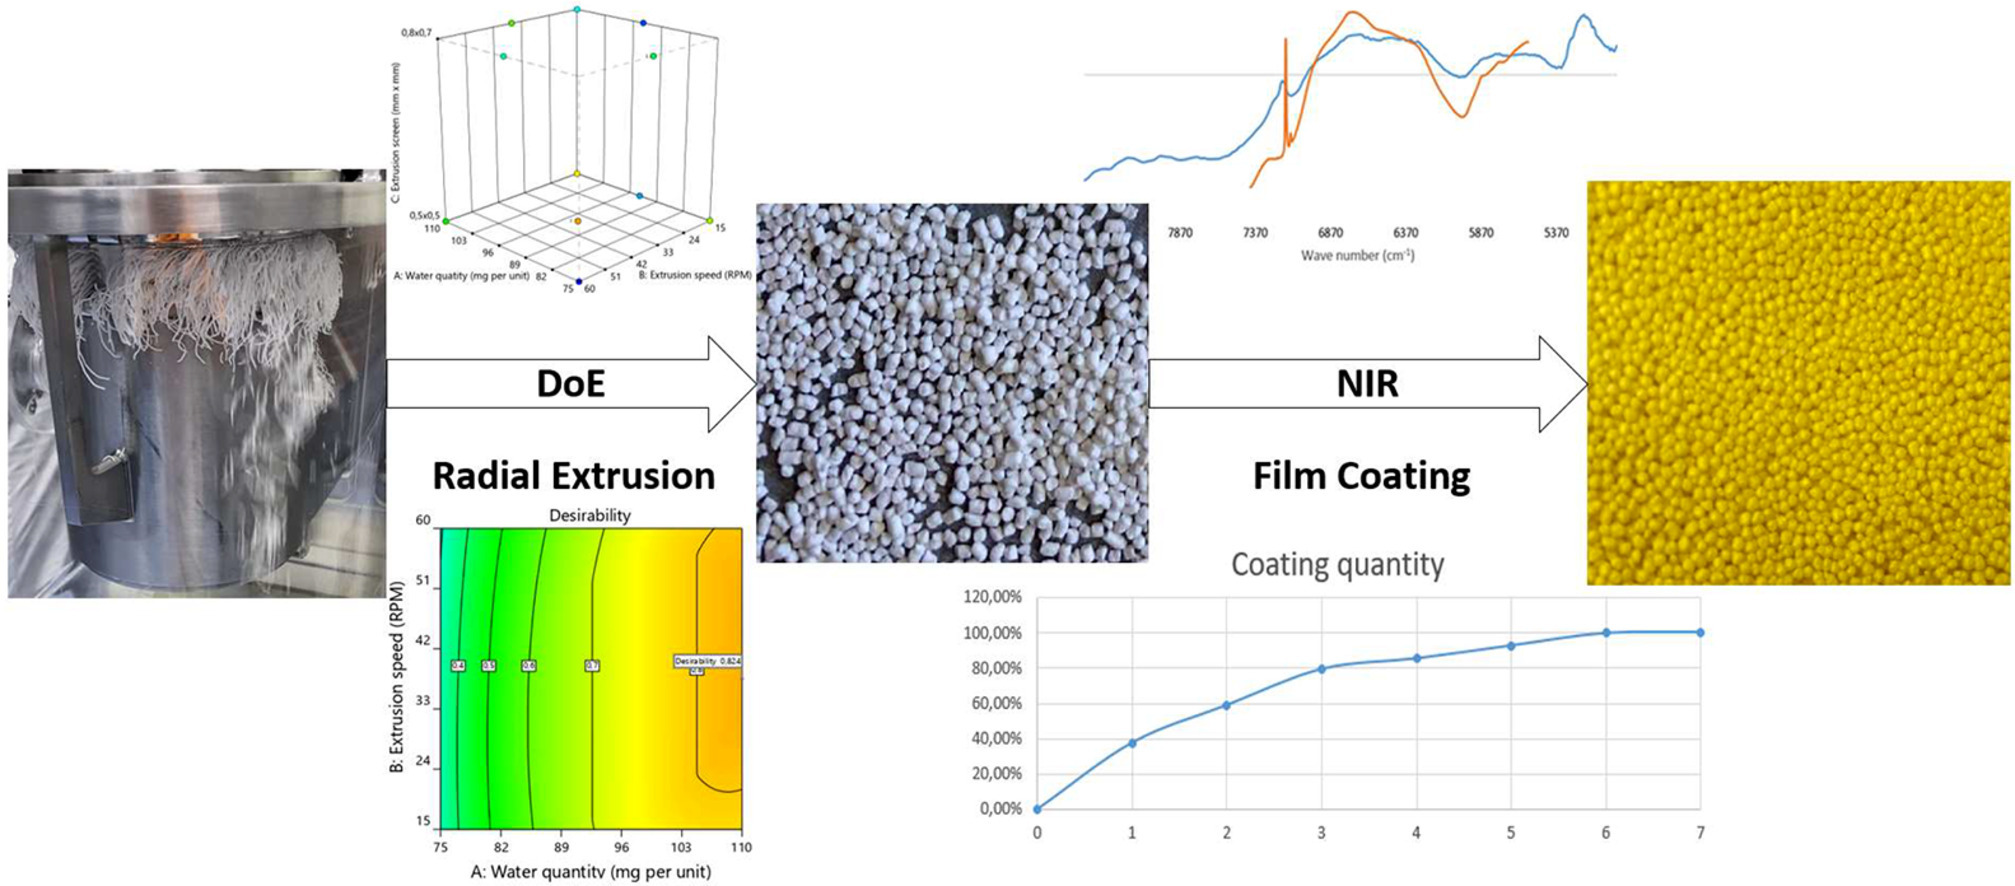 Optimization of radial extrusion and pellet coating processes using pat approaches